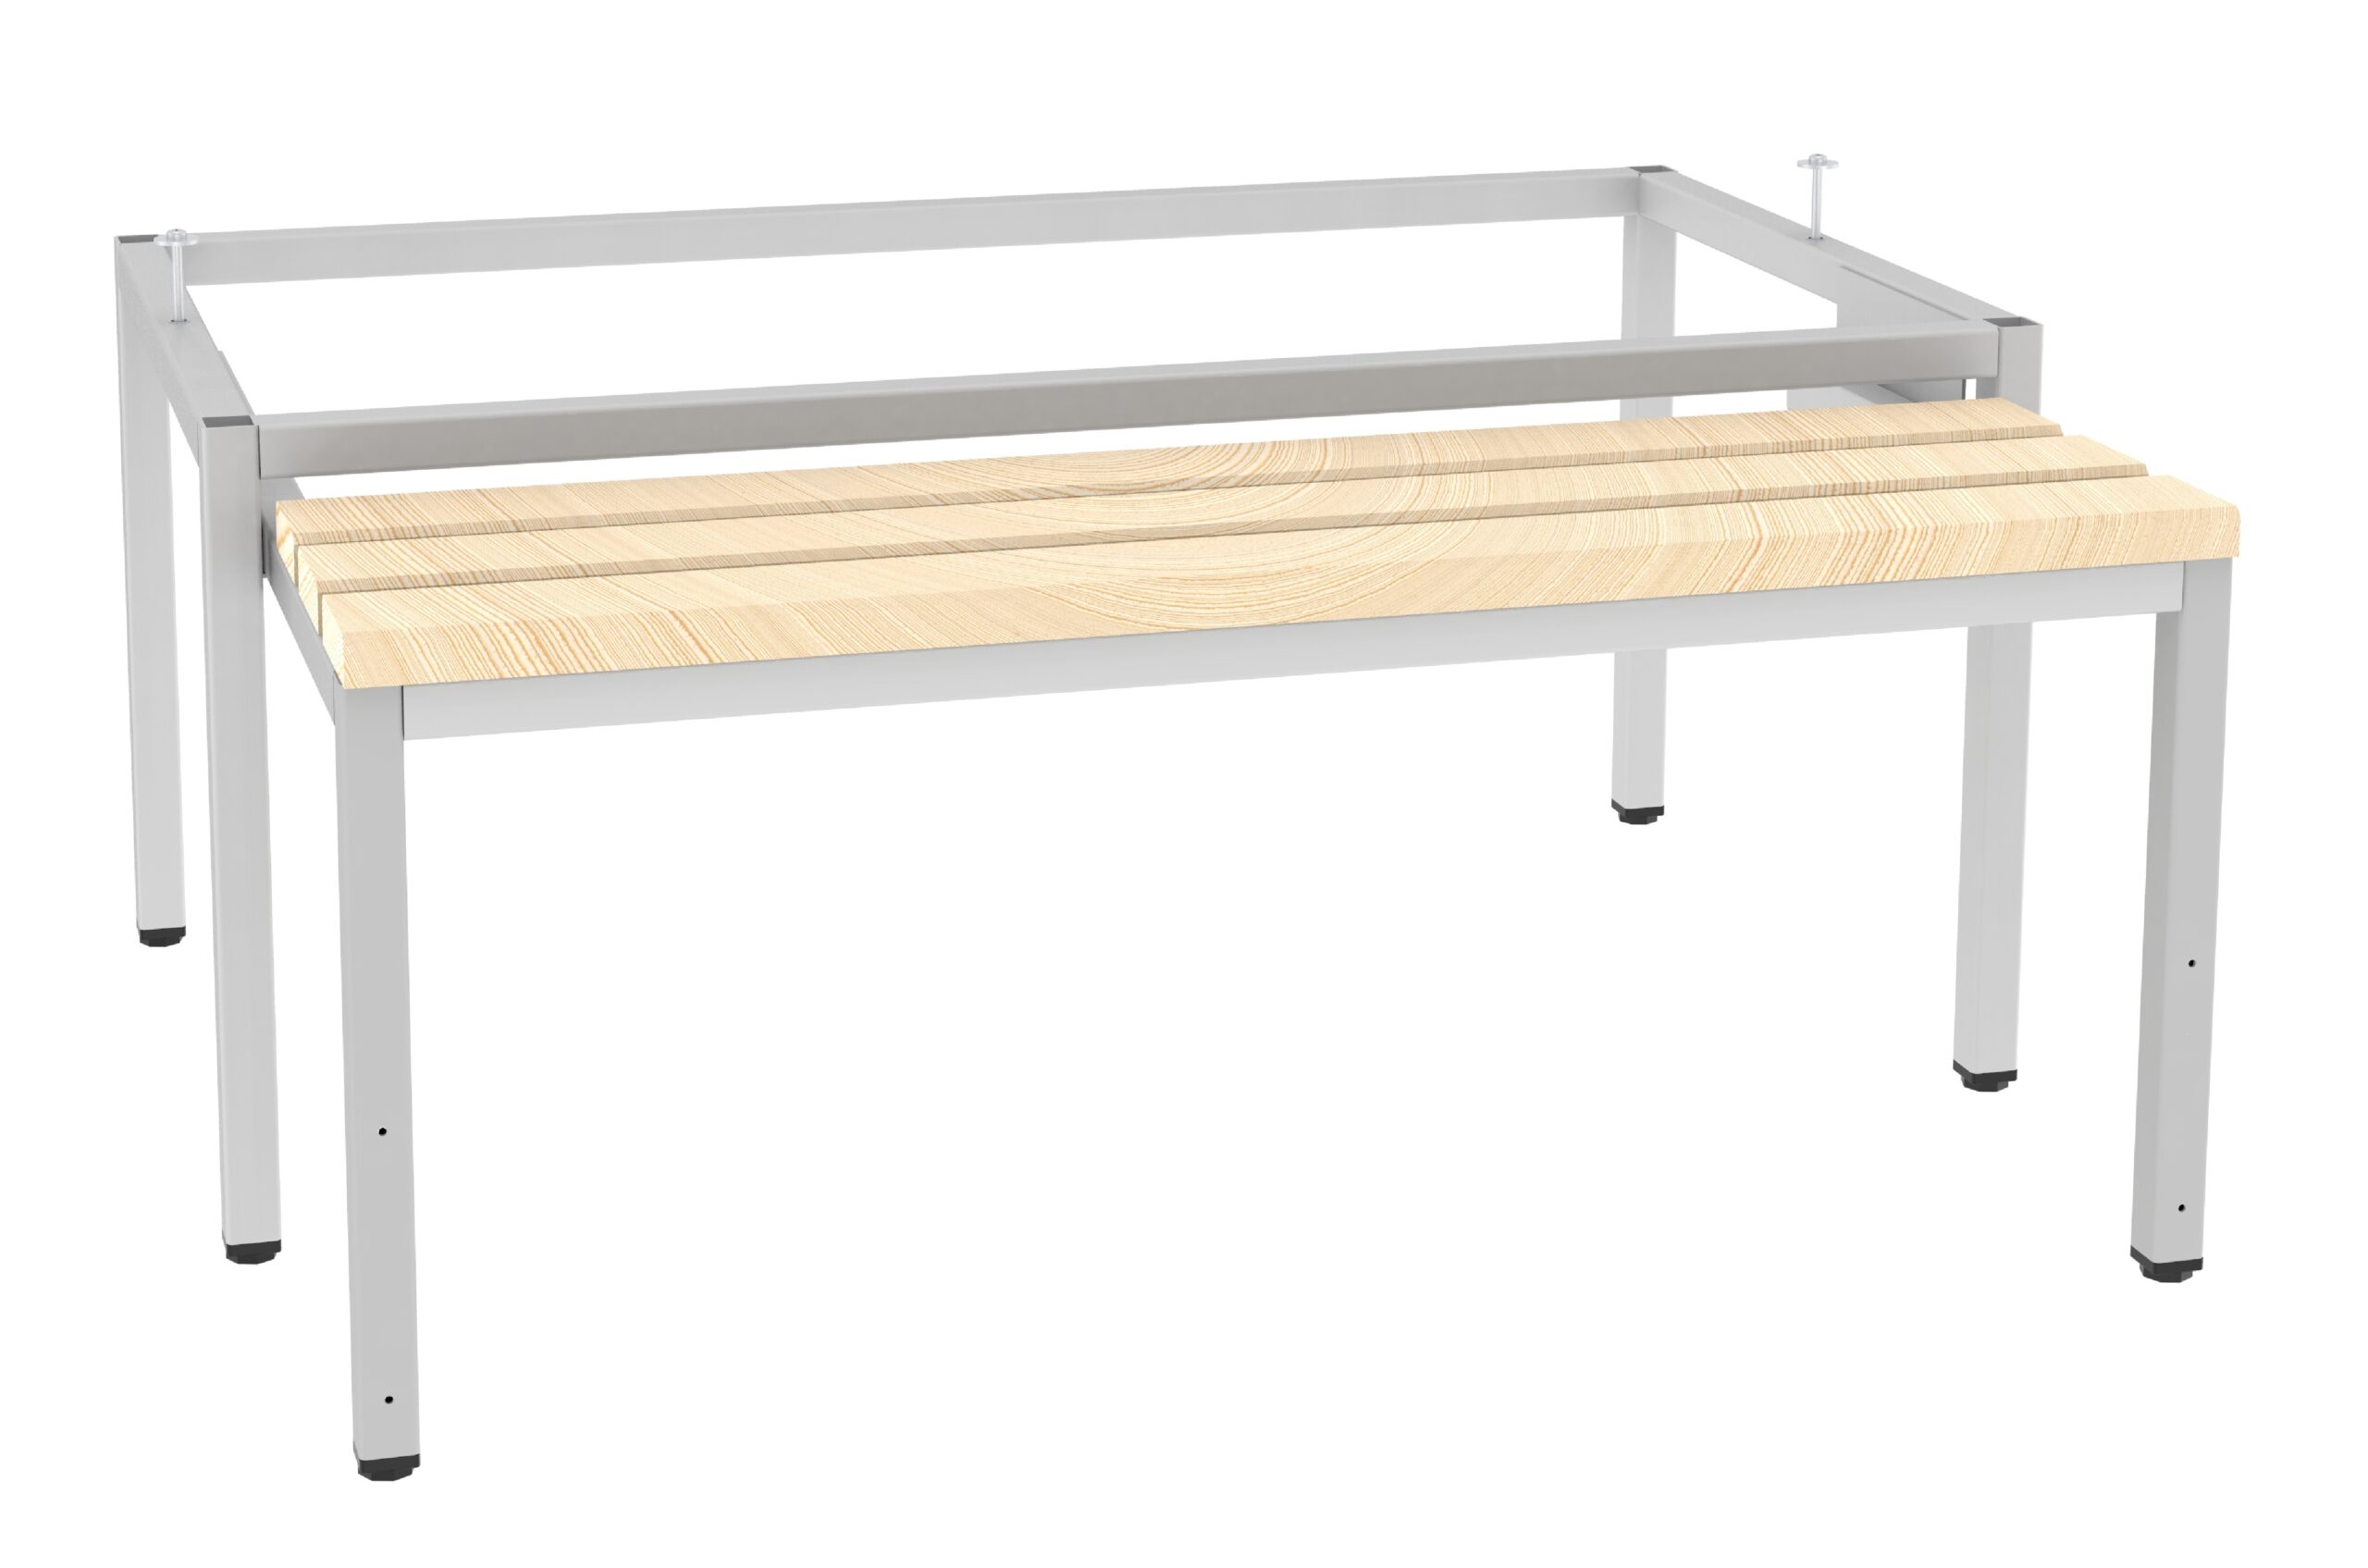 Foot frame Storit with a pull-out bench 900 mm, RAL7035 - Storit